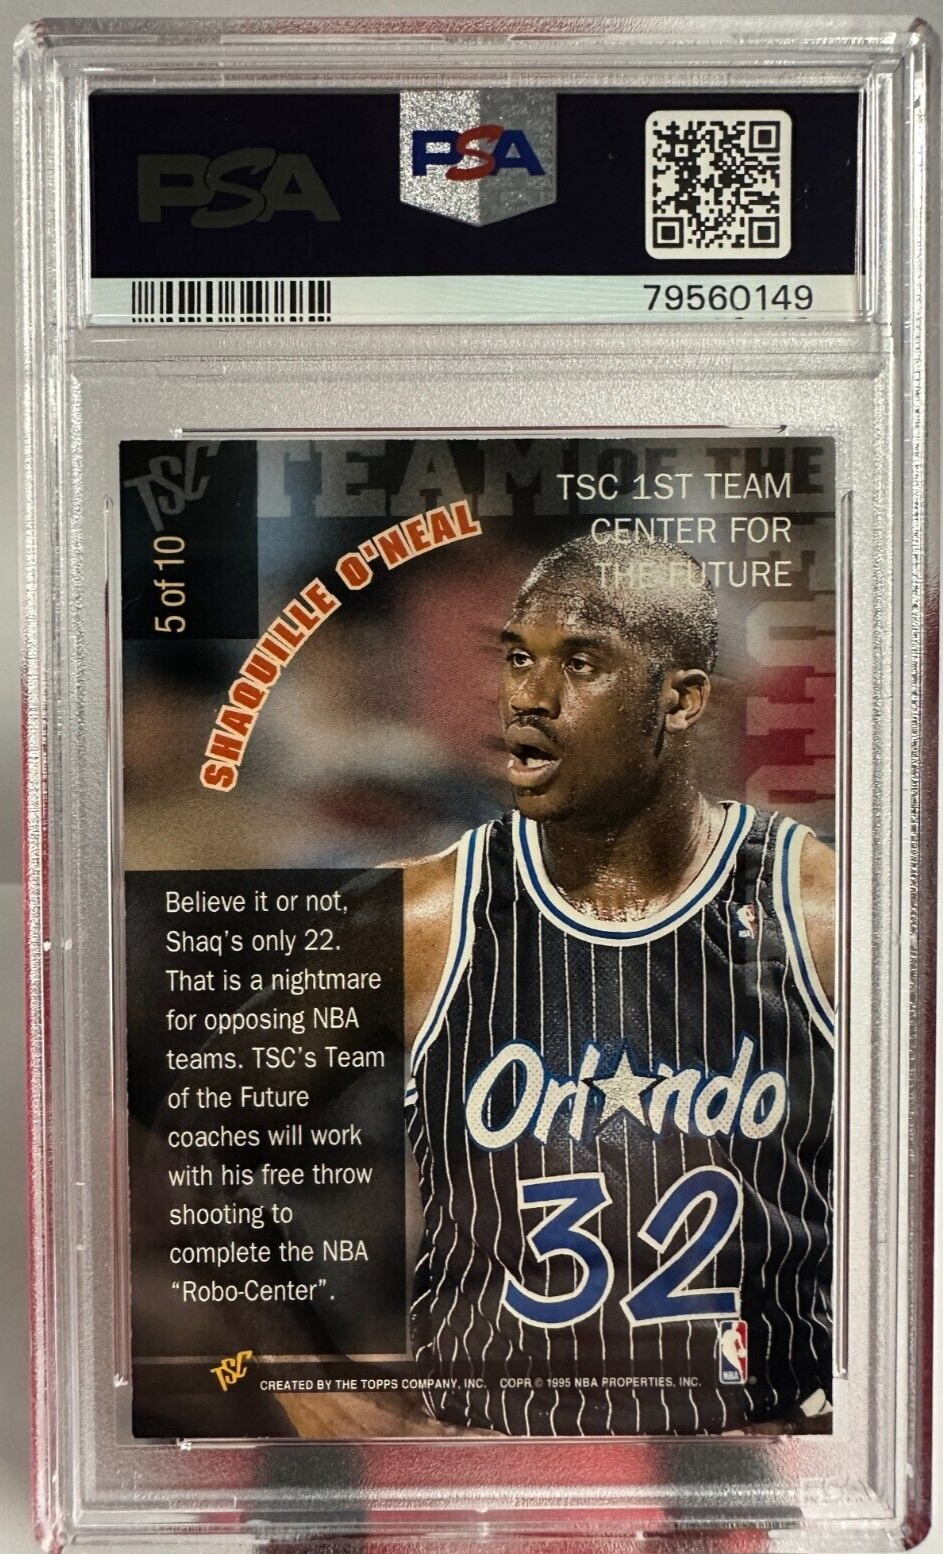 1994 Topps Stadium Club Shaquille O'Neal Team of the Future Card PSA 7 NM